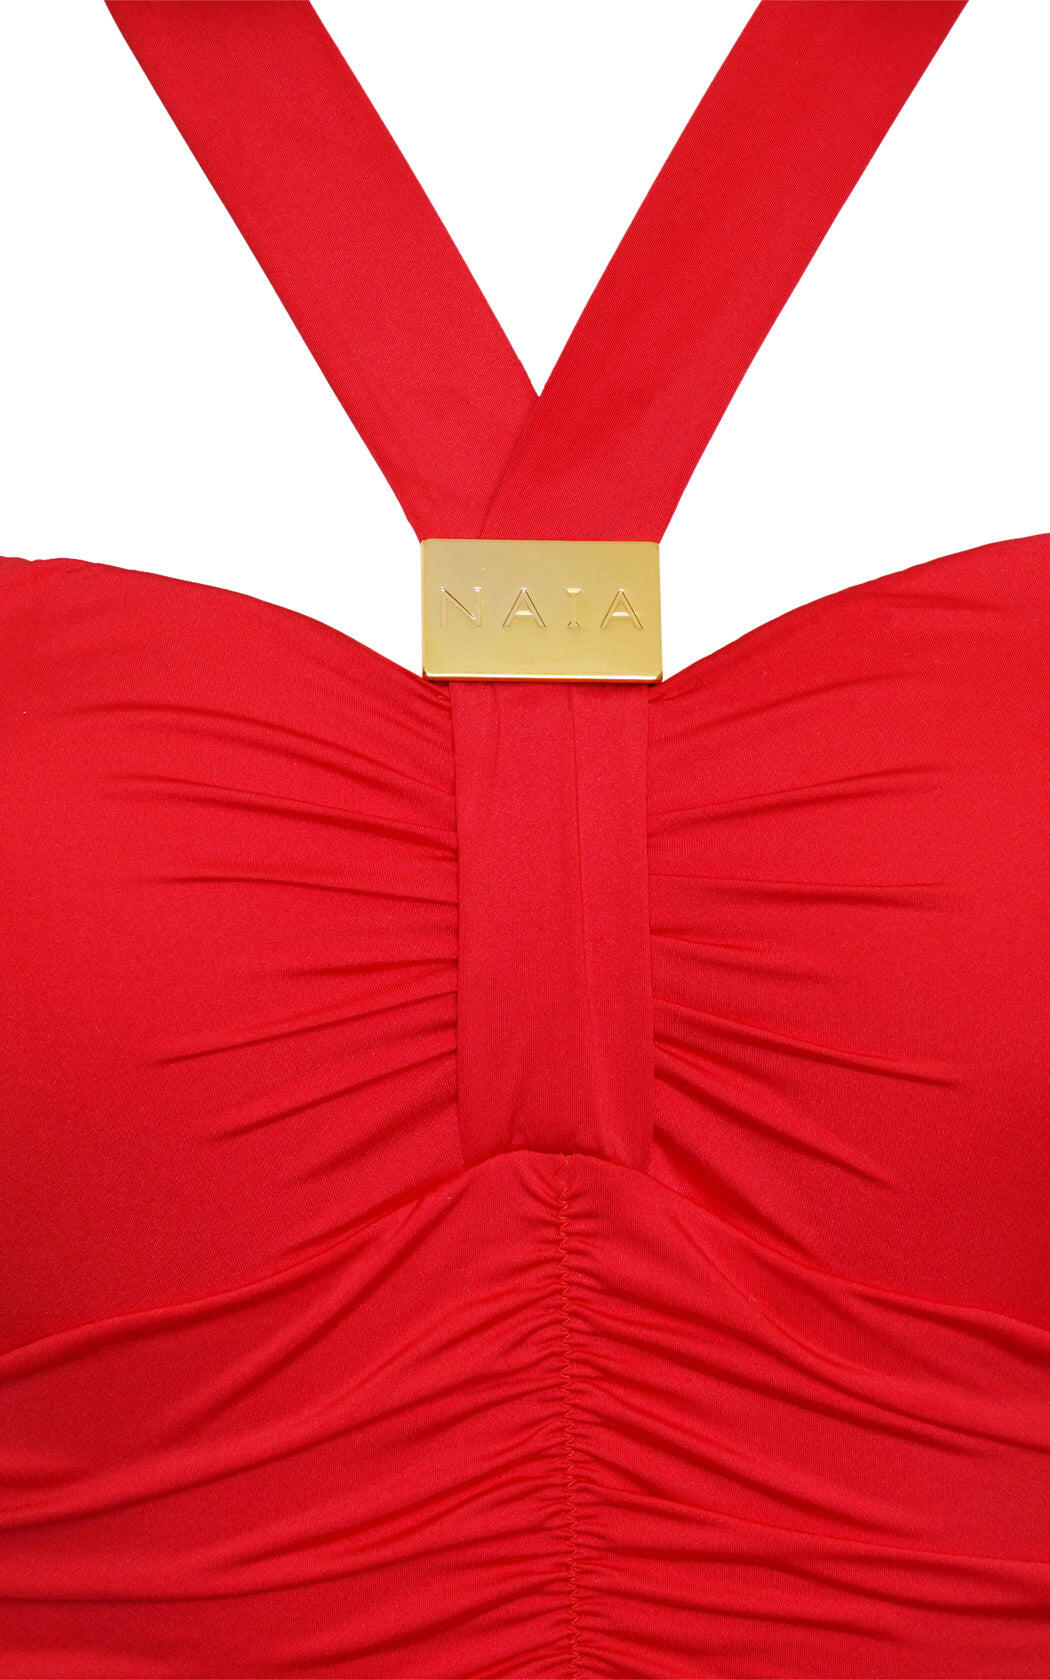 Red One Piece Swimsuit with Naia Gold Hardware